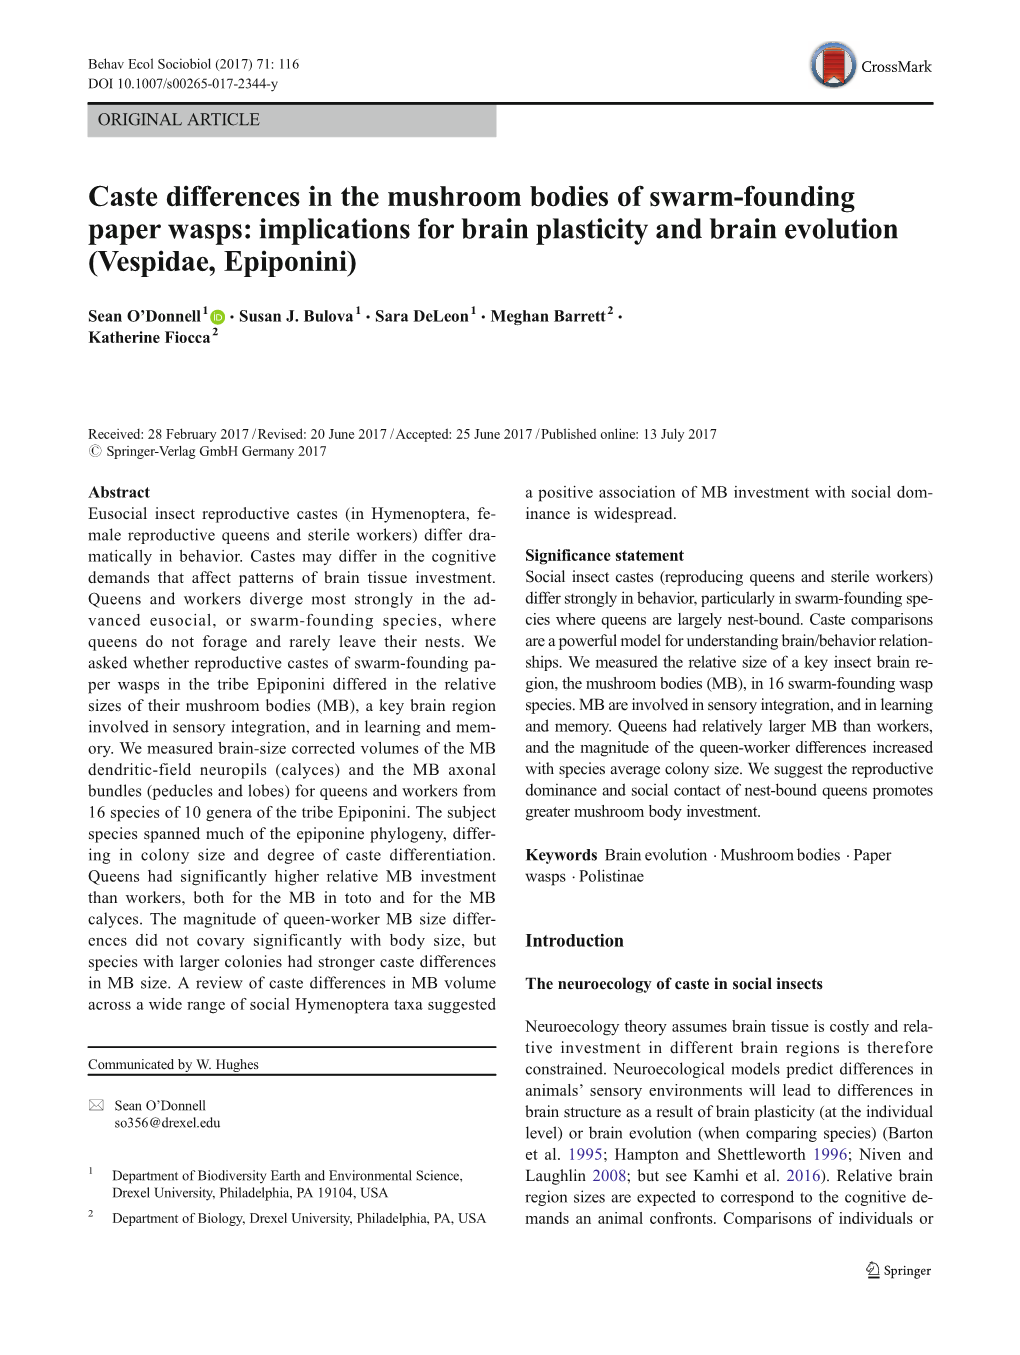 Caste Differences in the Mushroom Bodies of Swarm-Founding Paper Wasps: Implications for Brain Plasticity and Brain Evolution (Vespidae, Epiponini)